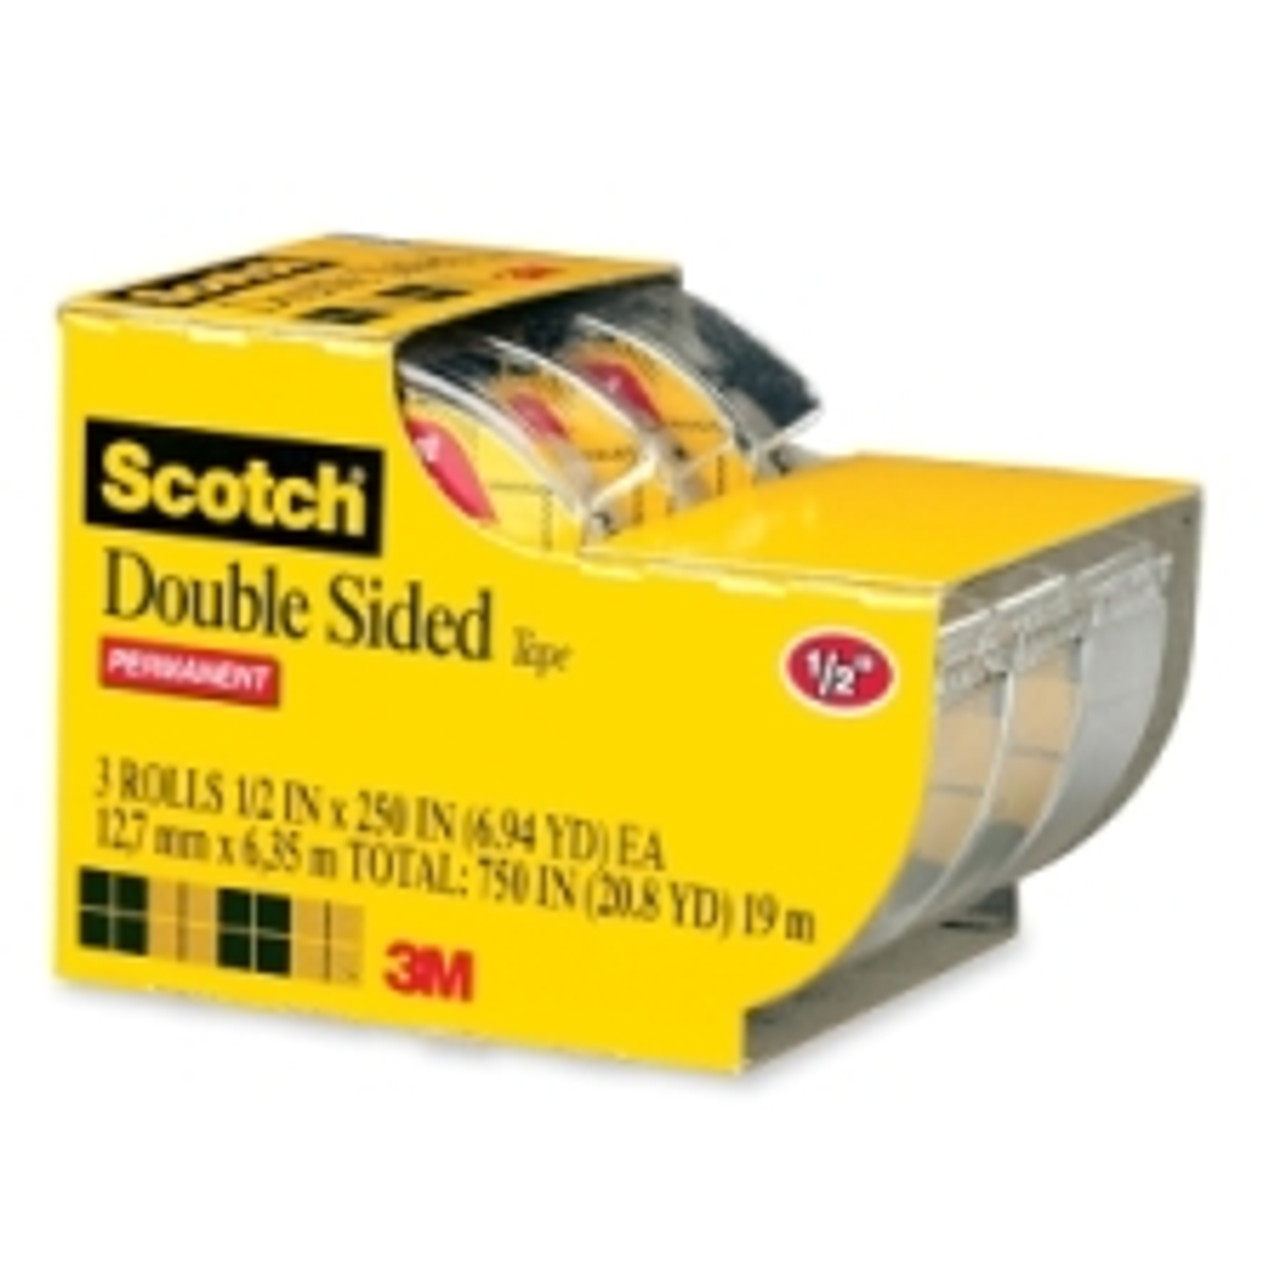 Scotch Double Sided Photo-Safe Permanent Self-Adhesive Office Tape